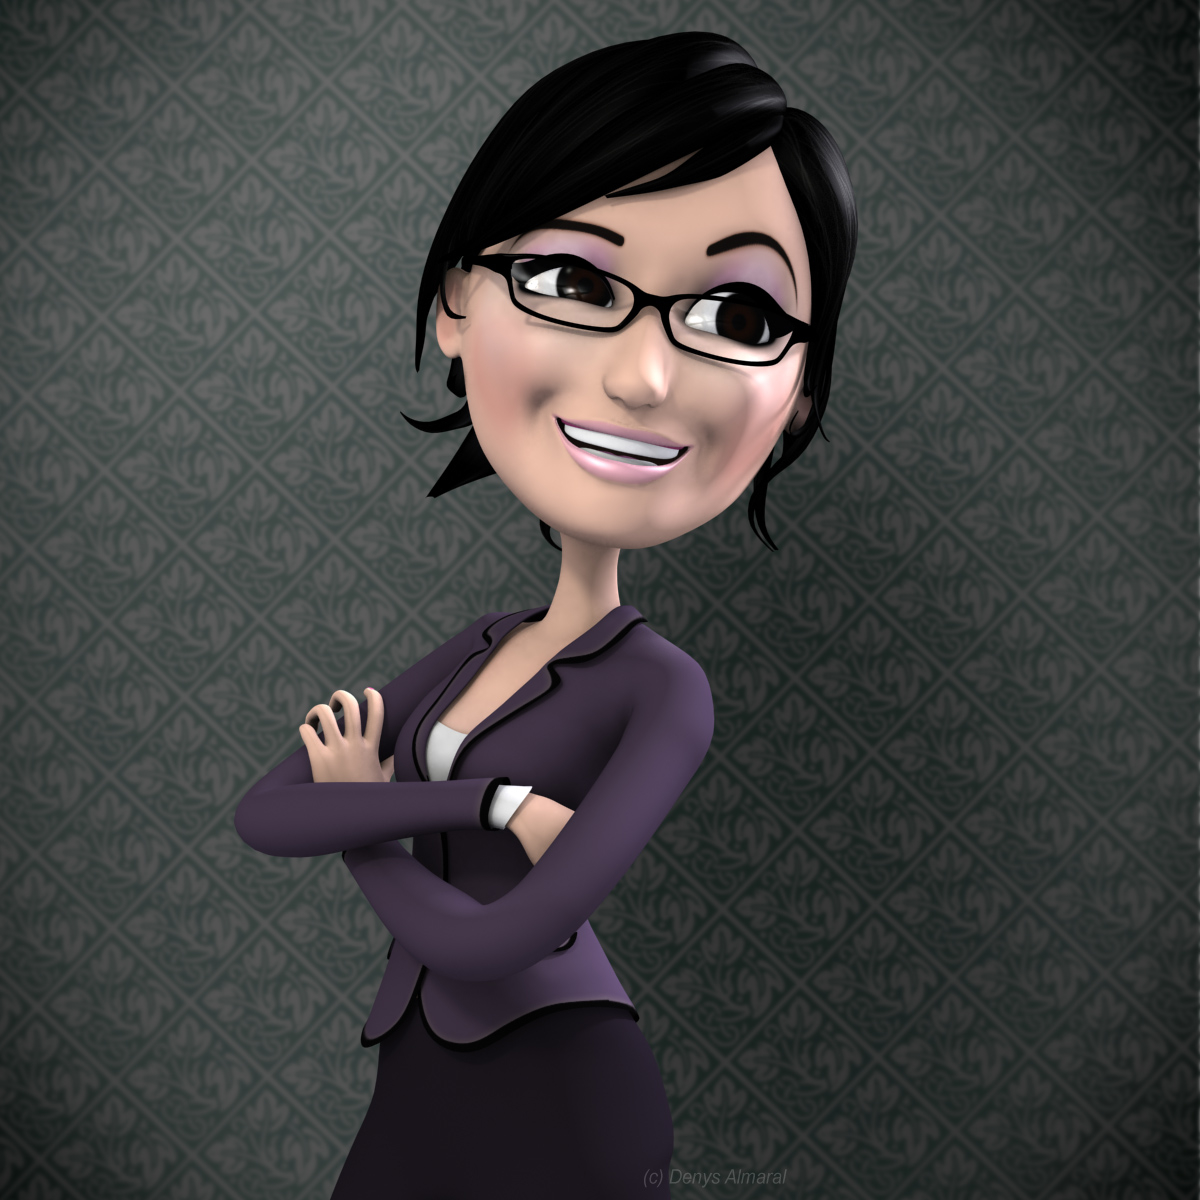 35+ Ide Black Girl Cartoon Character With Glasses.